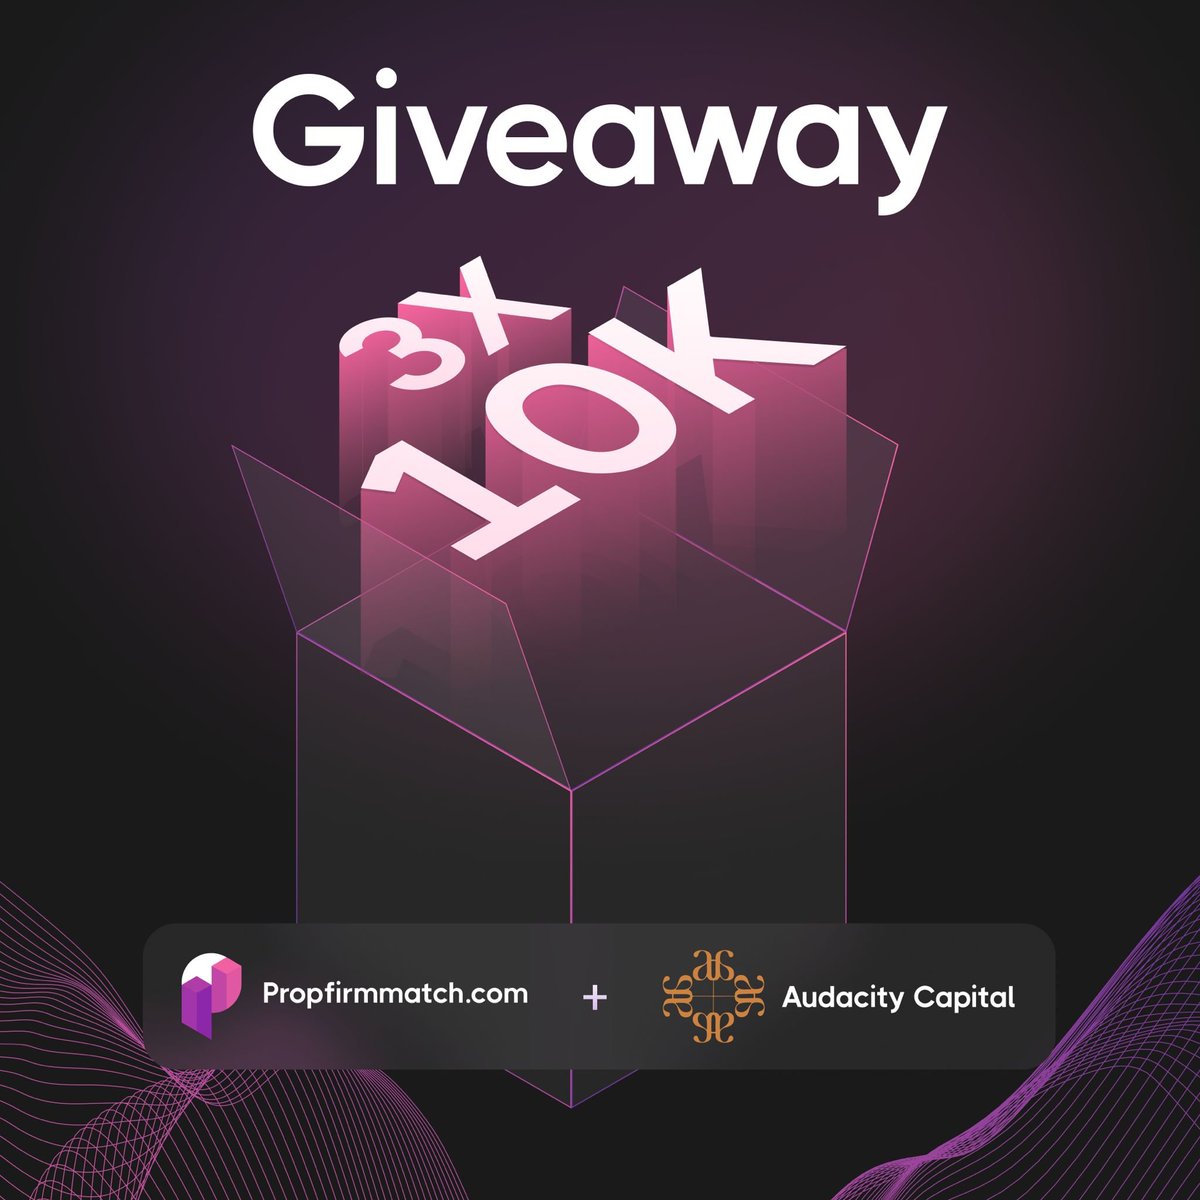 3x10k Challenge Account Giveaway from @Audacitycap 🎉 To participate 👇 -Follow @PropFirmMatch ， @Curo_Labs ，@Audacitycap ，@traderwuwei -Like + repost -Tag 2 friends -Like + repost quoted tweet Winners will be picked in 4 days 🥳